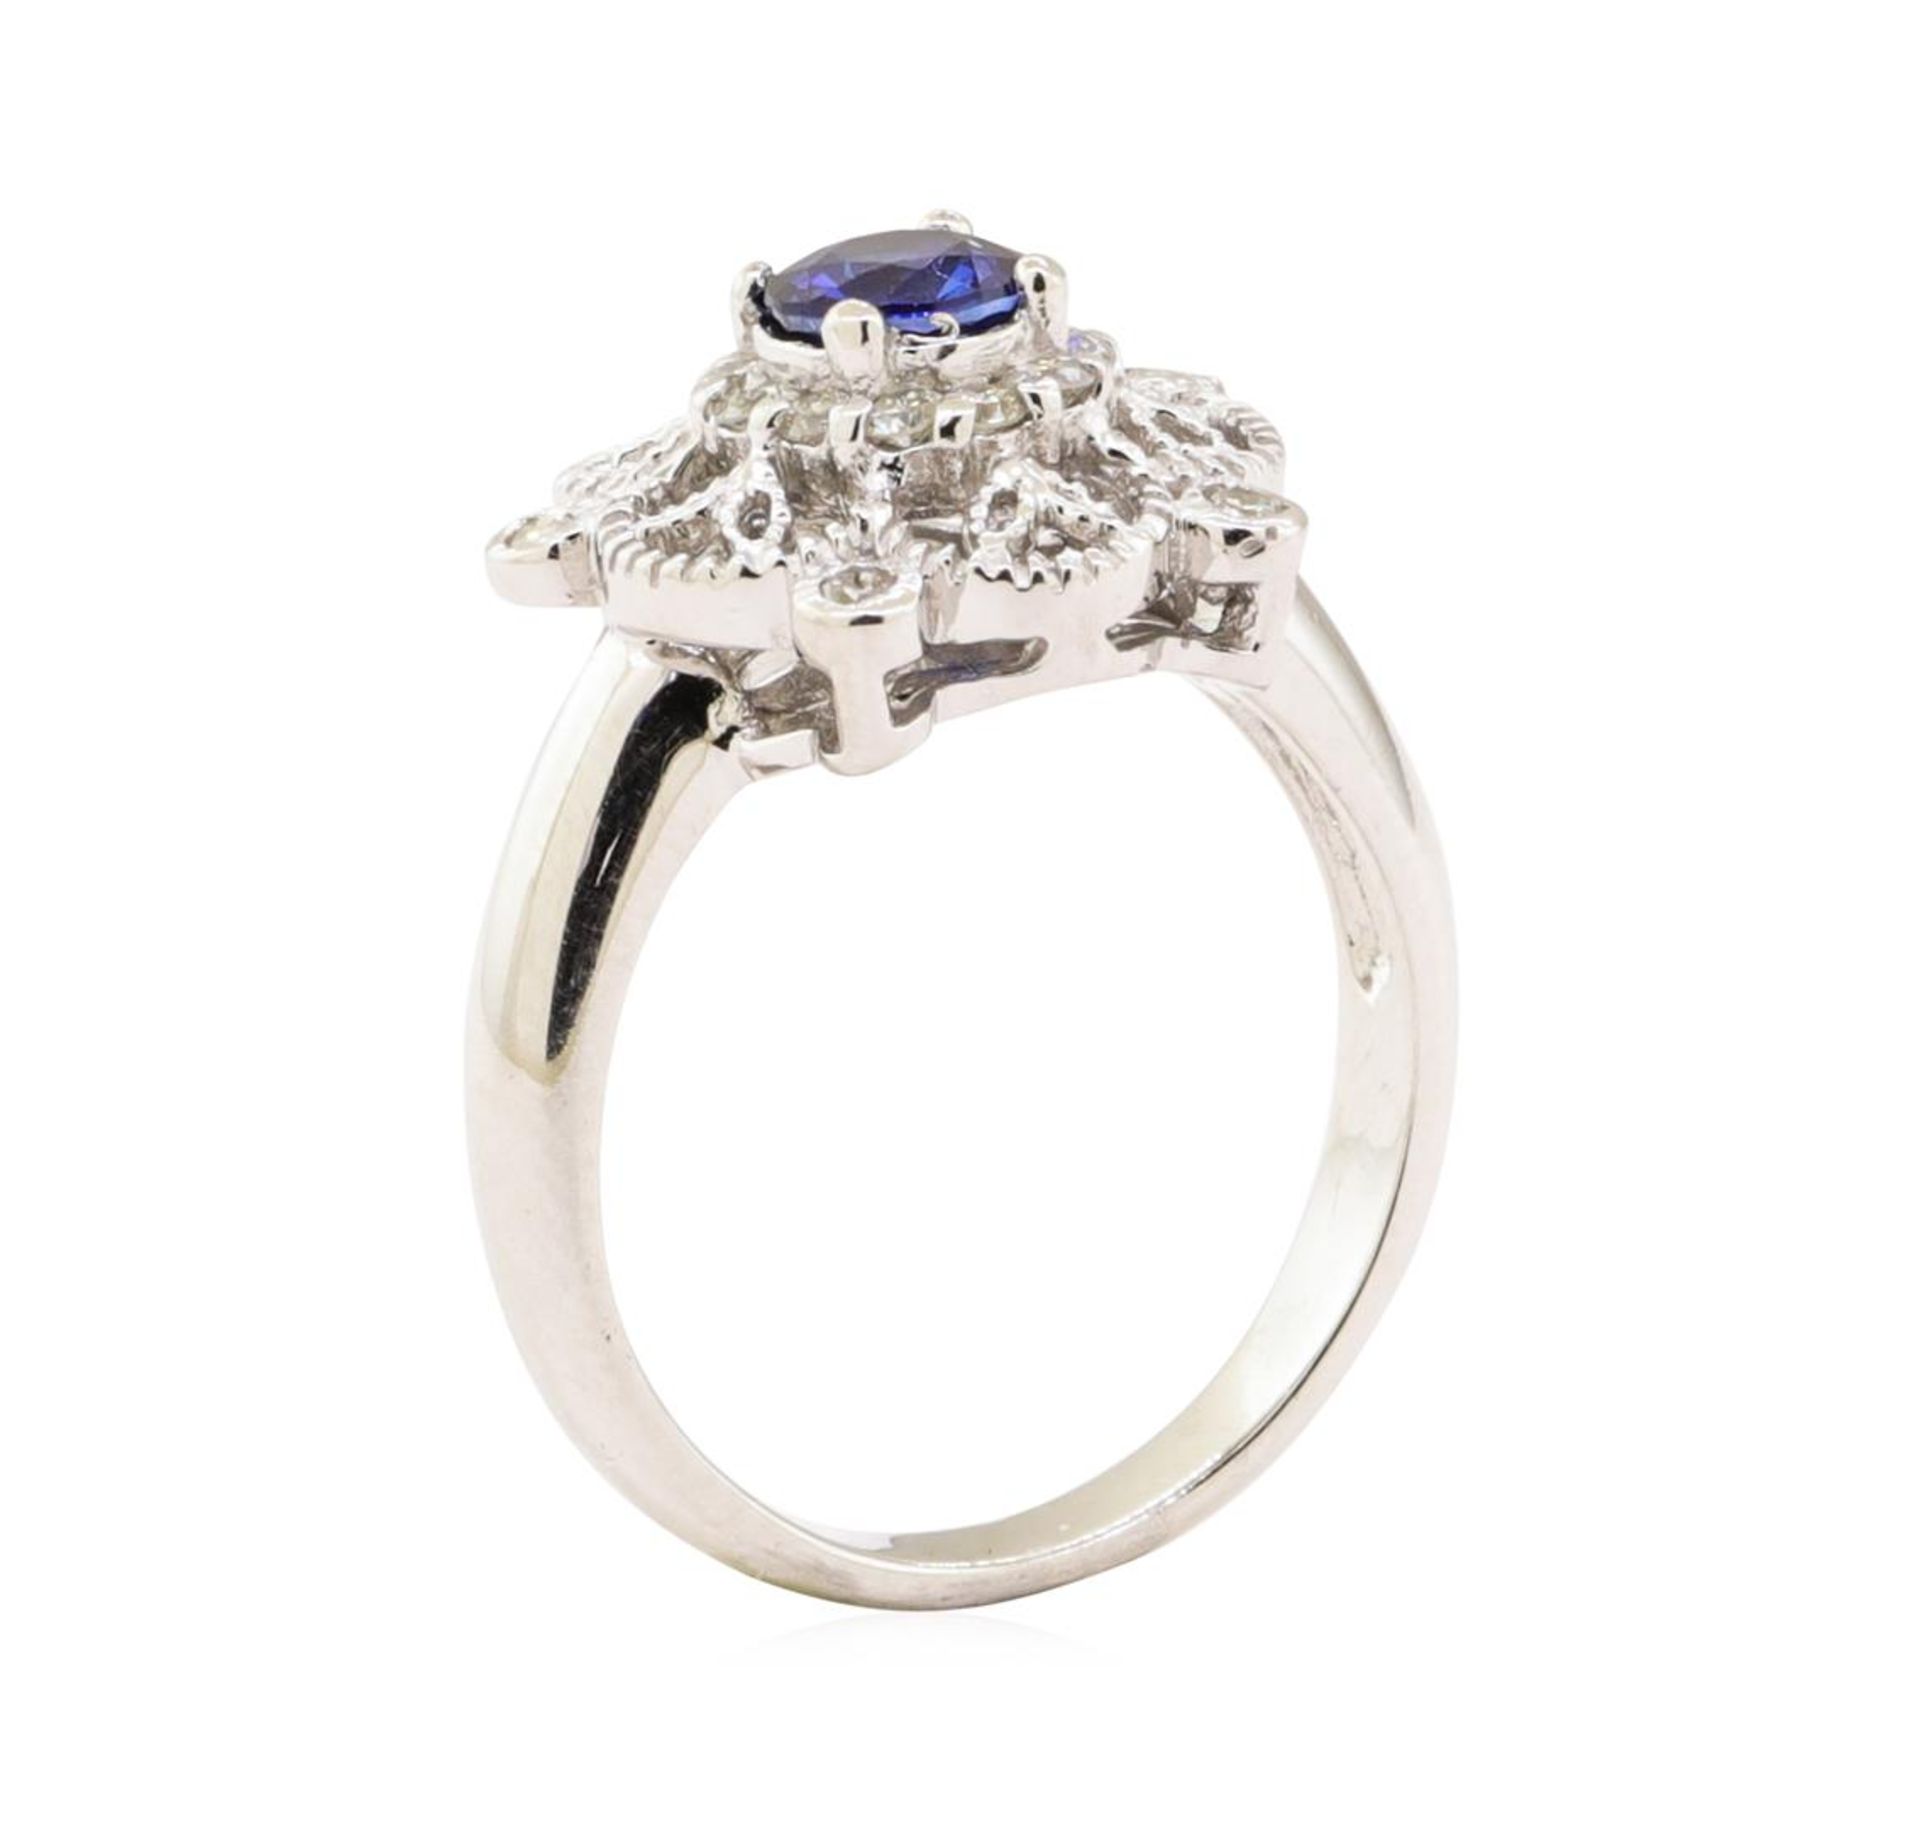 0.88 ctw Blue Sapphire And Diamond Ring - 14KT White Gold - Image 4 of 5